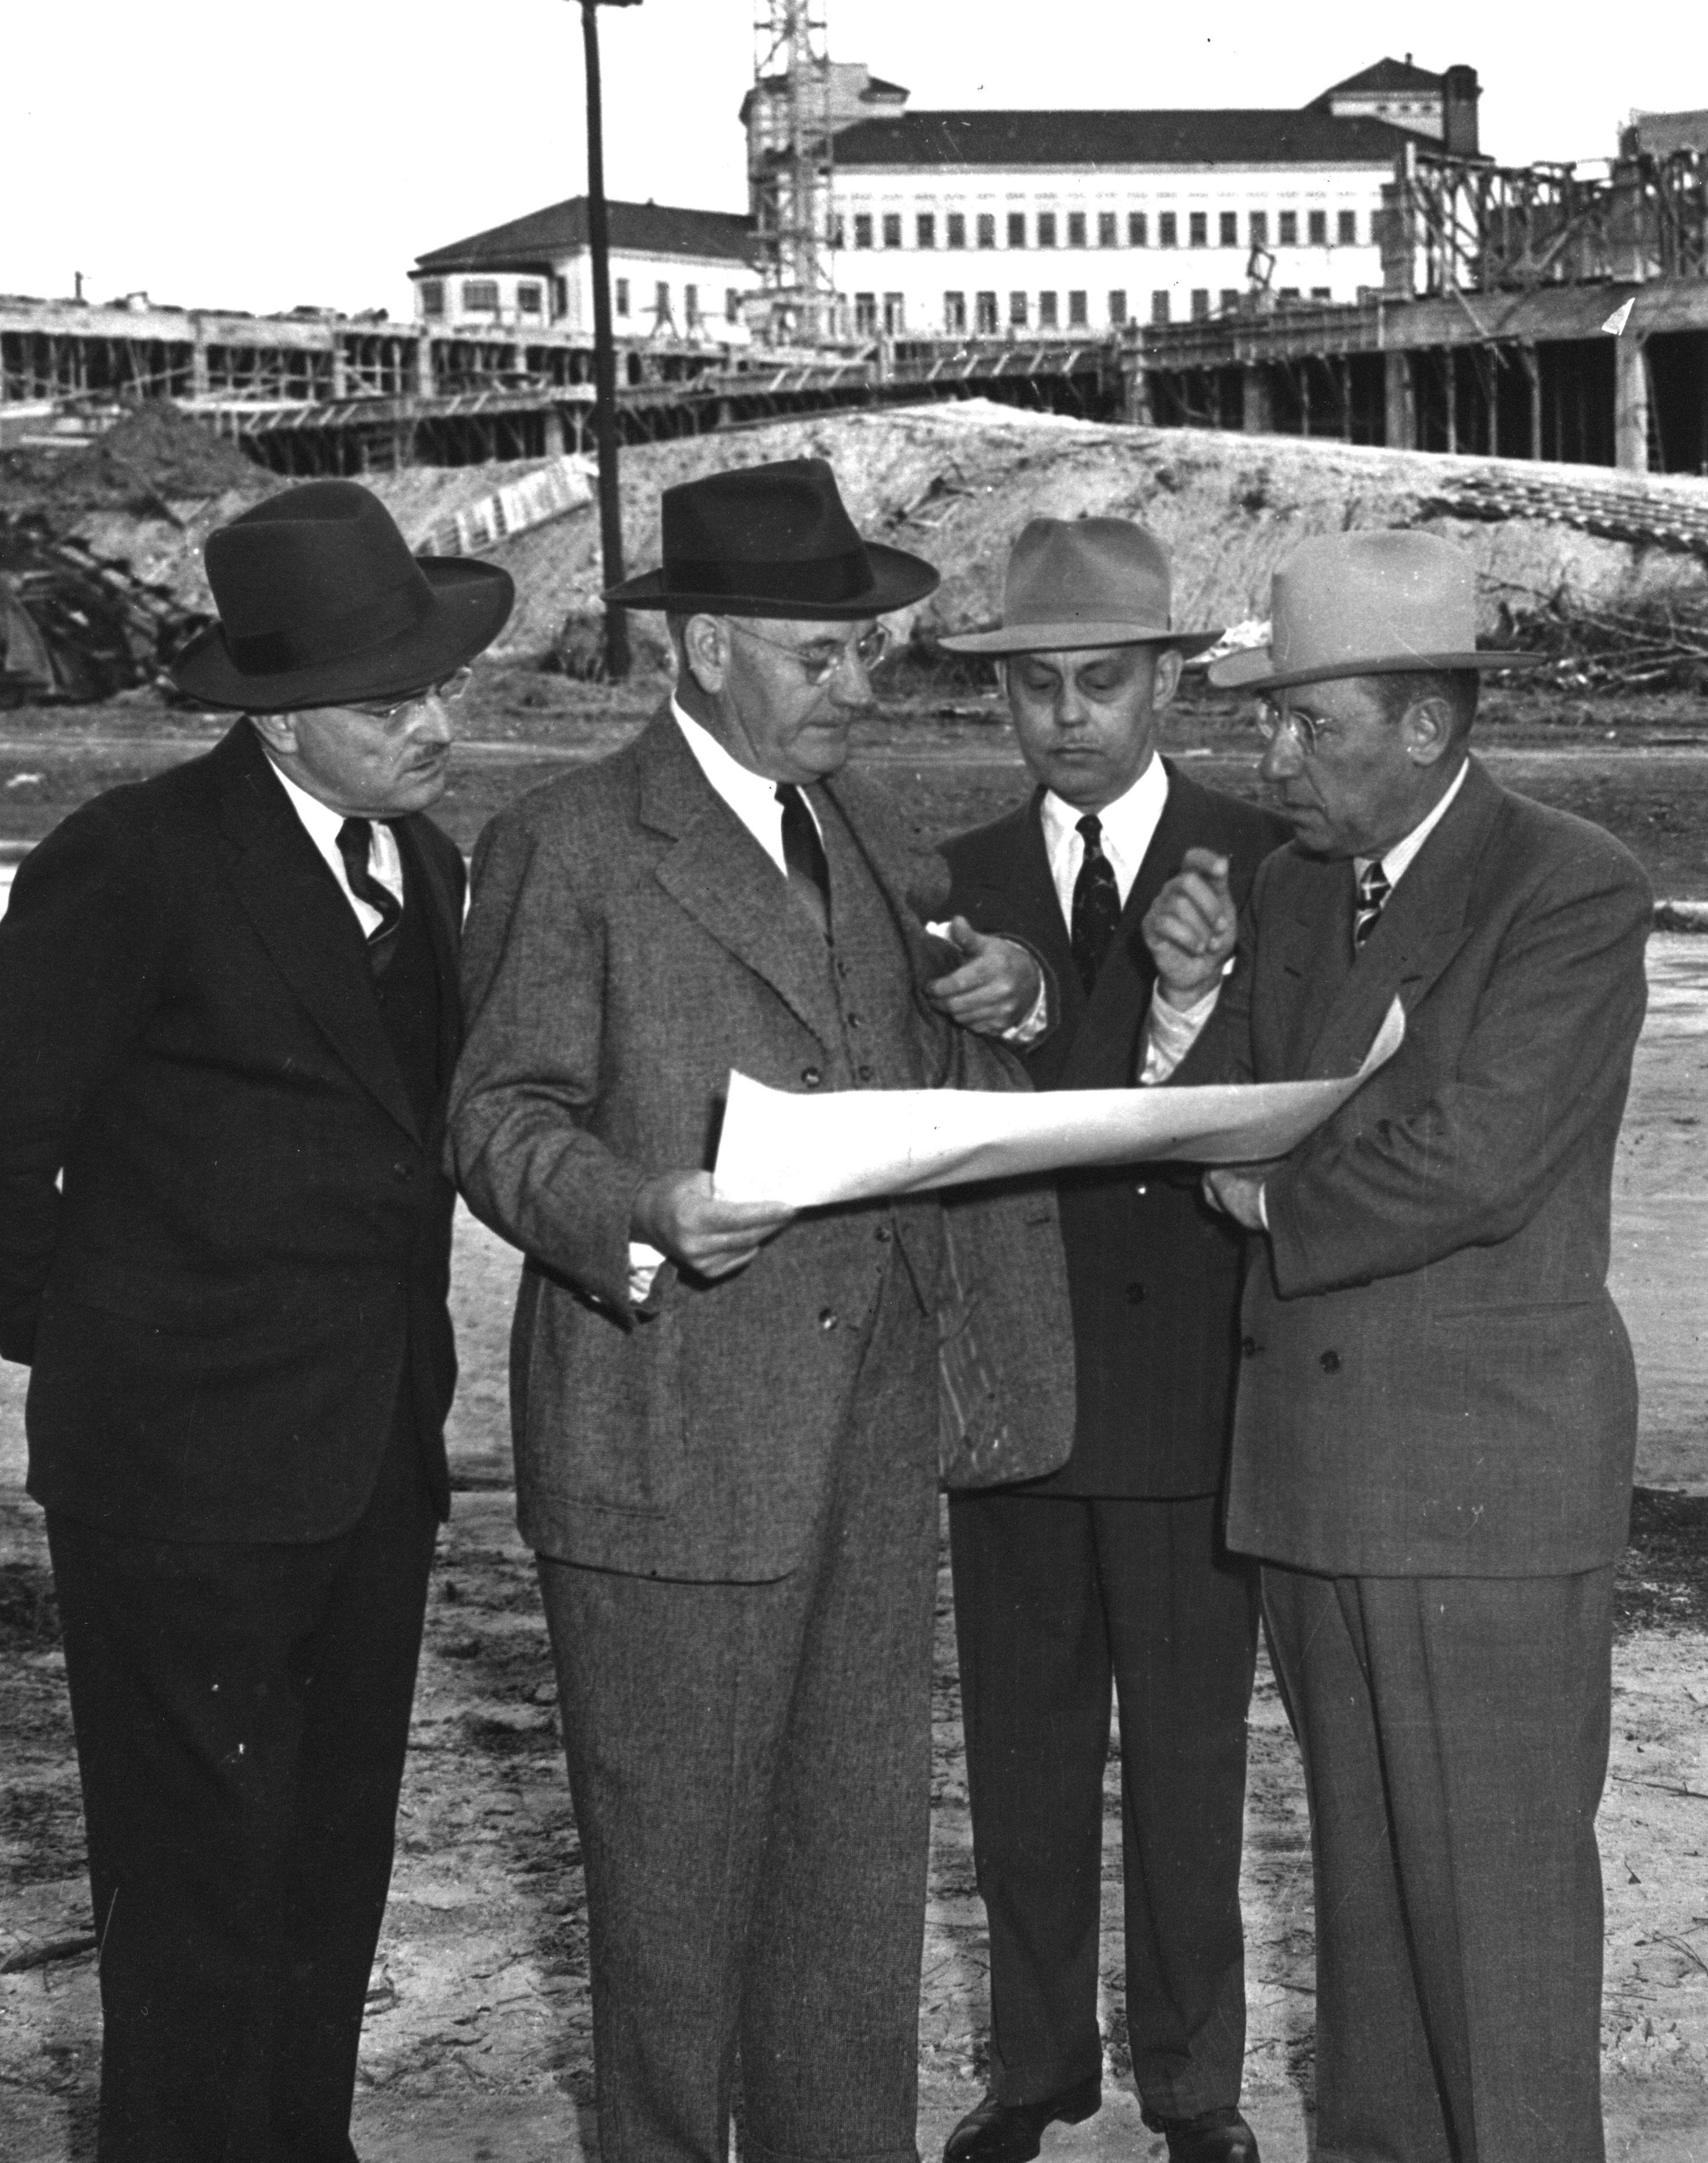 Dr. Bertner looking at plans with Texas Children's Foundation trustees, c. 1948. Hermann Hospital in the background. [E. W. Bertner, MS002, McGovern Historical Center]